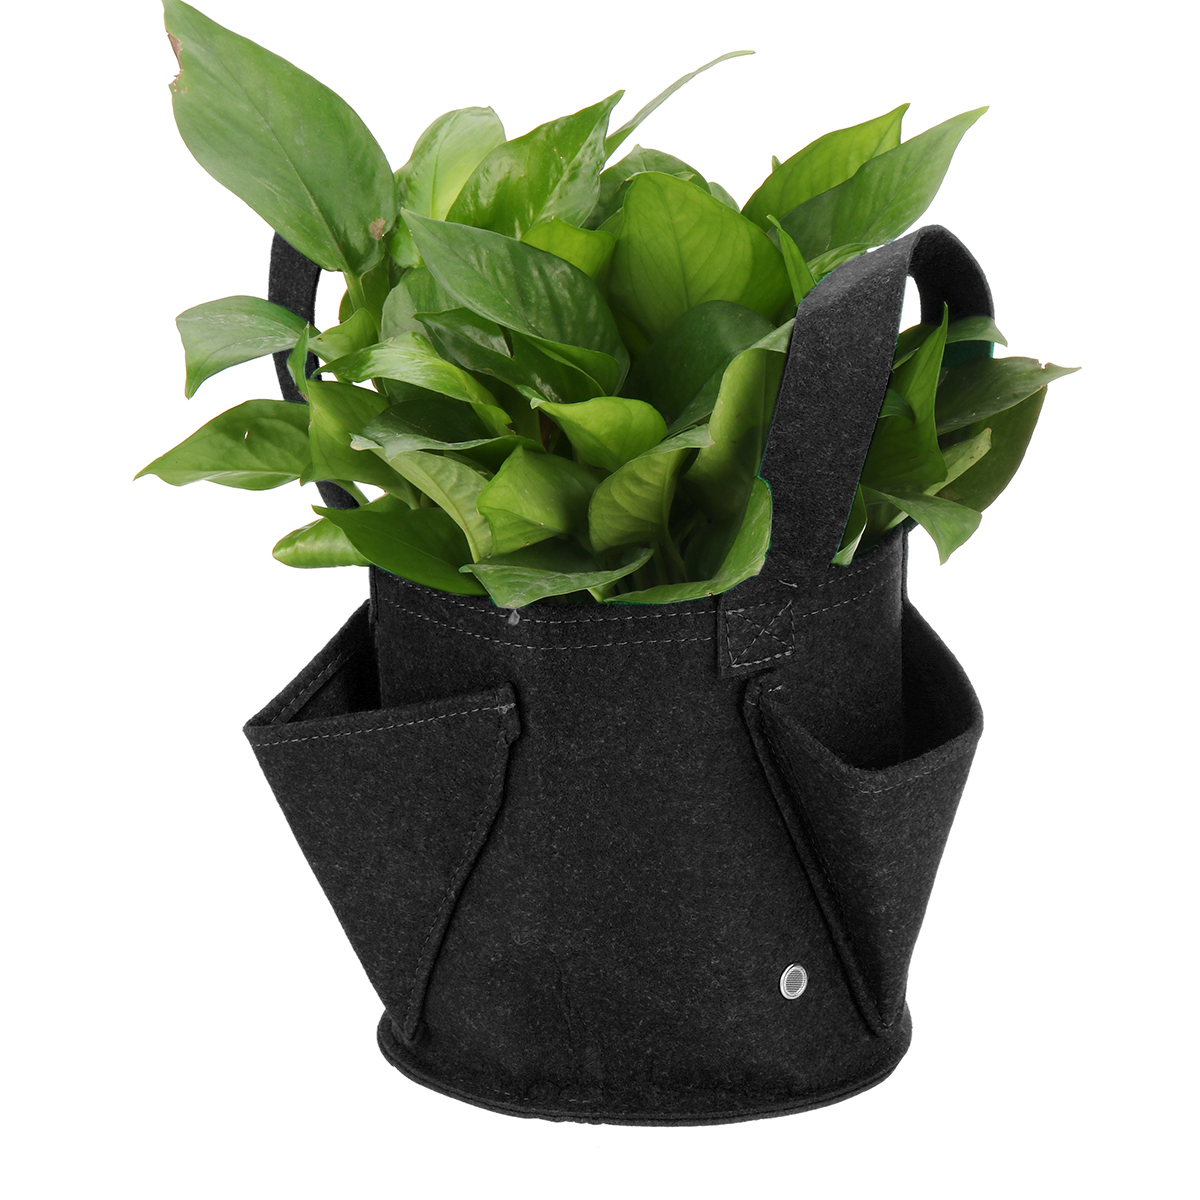 2mm-Ultra-Thick-Black-Round-Planting-Container-Non-Woven-Felt-Planter-Pot-Grow-Bags-Plants-Nursery-S-1544992-9